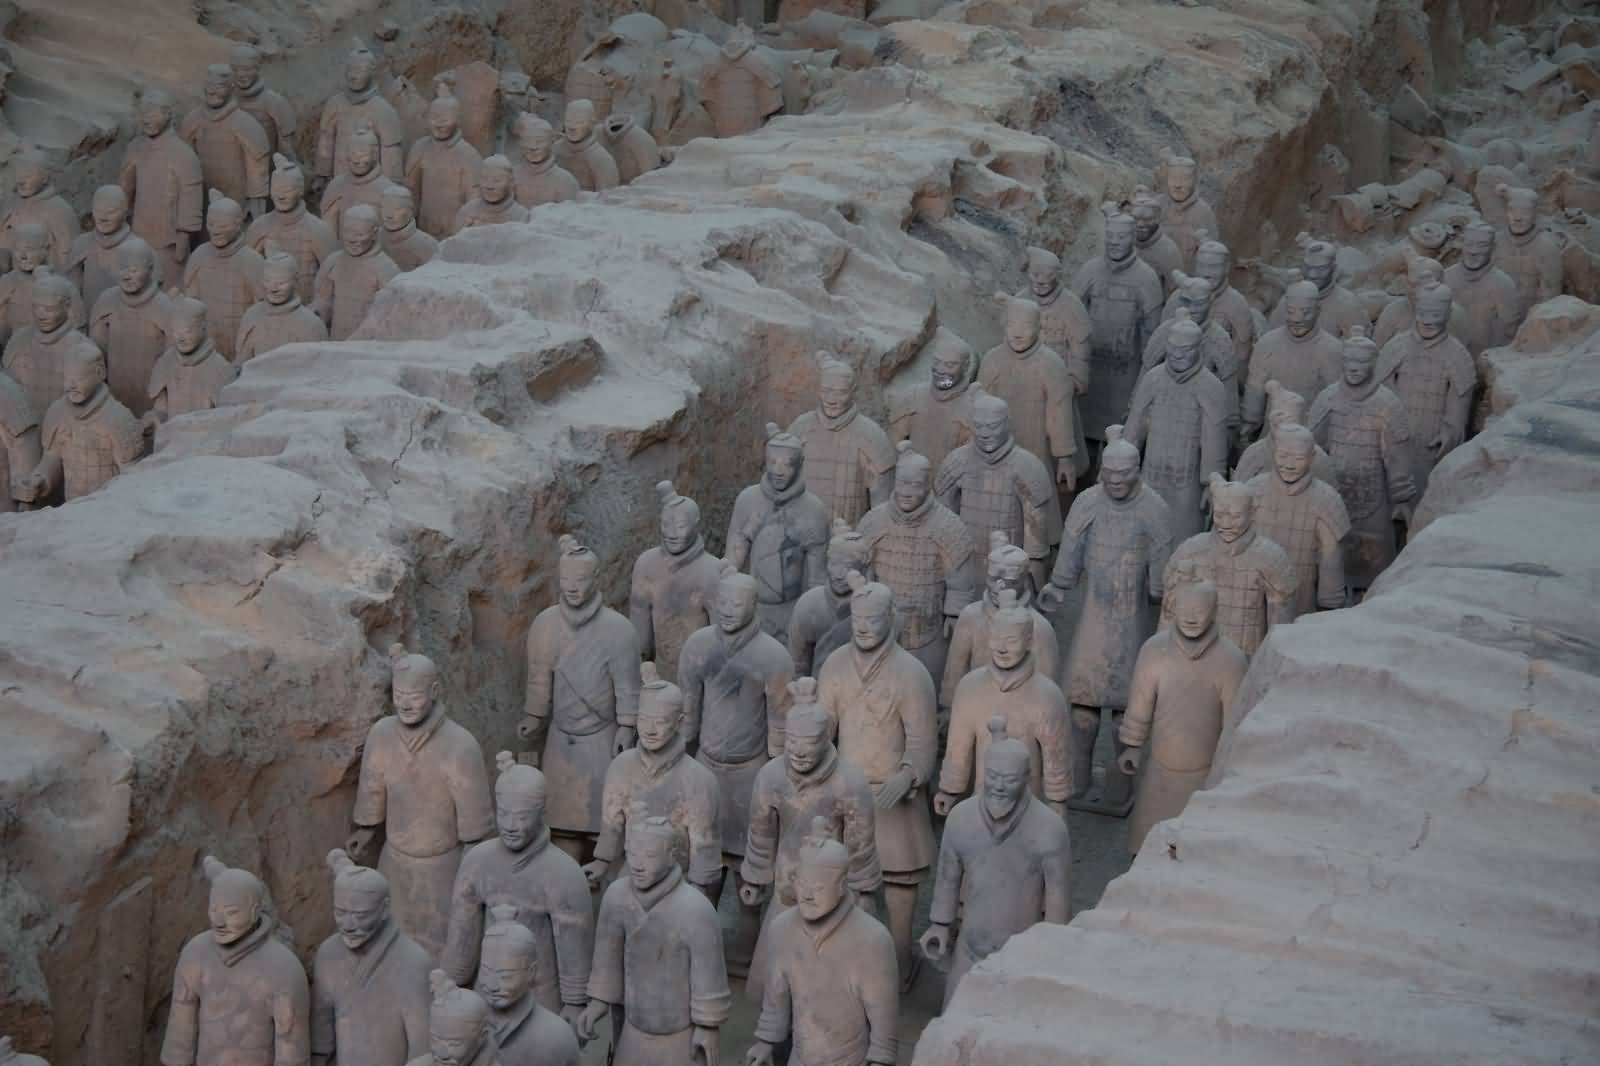 View Of Pit1 Terracotta Army